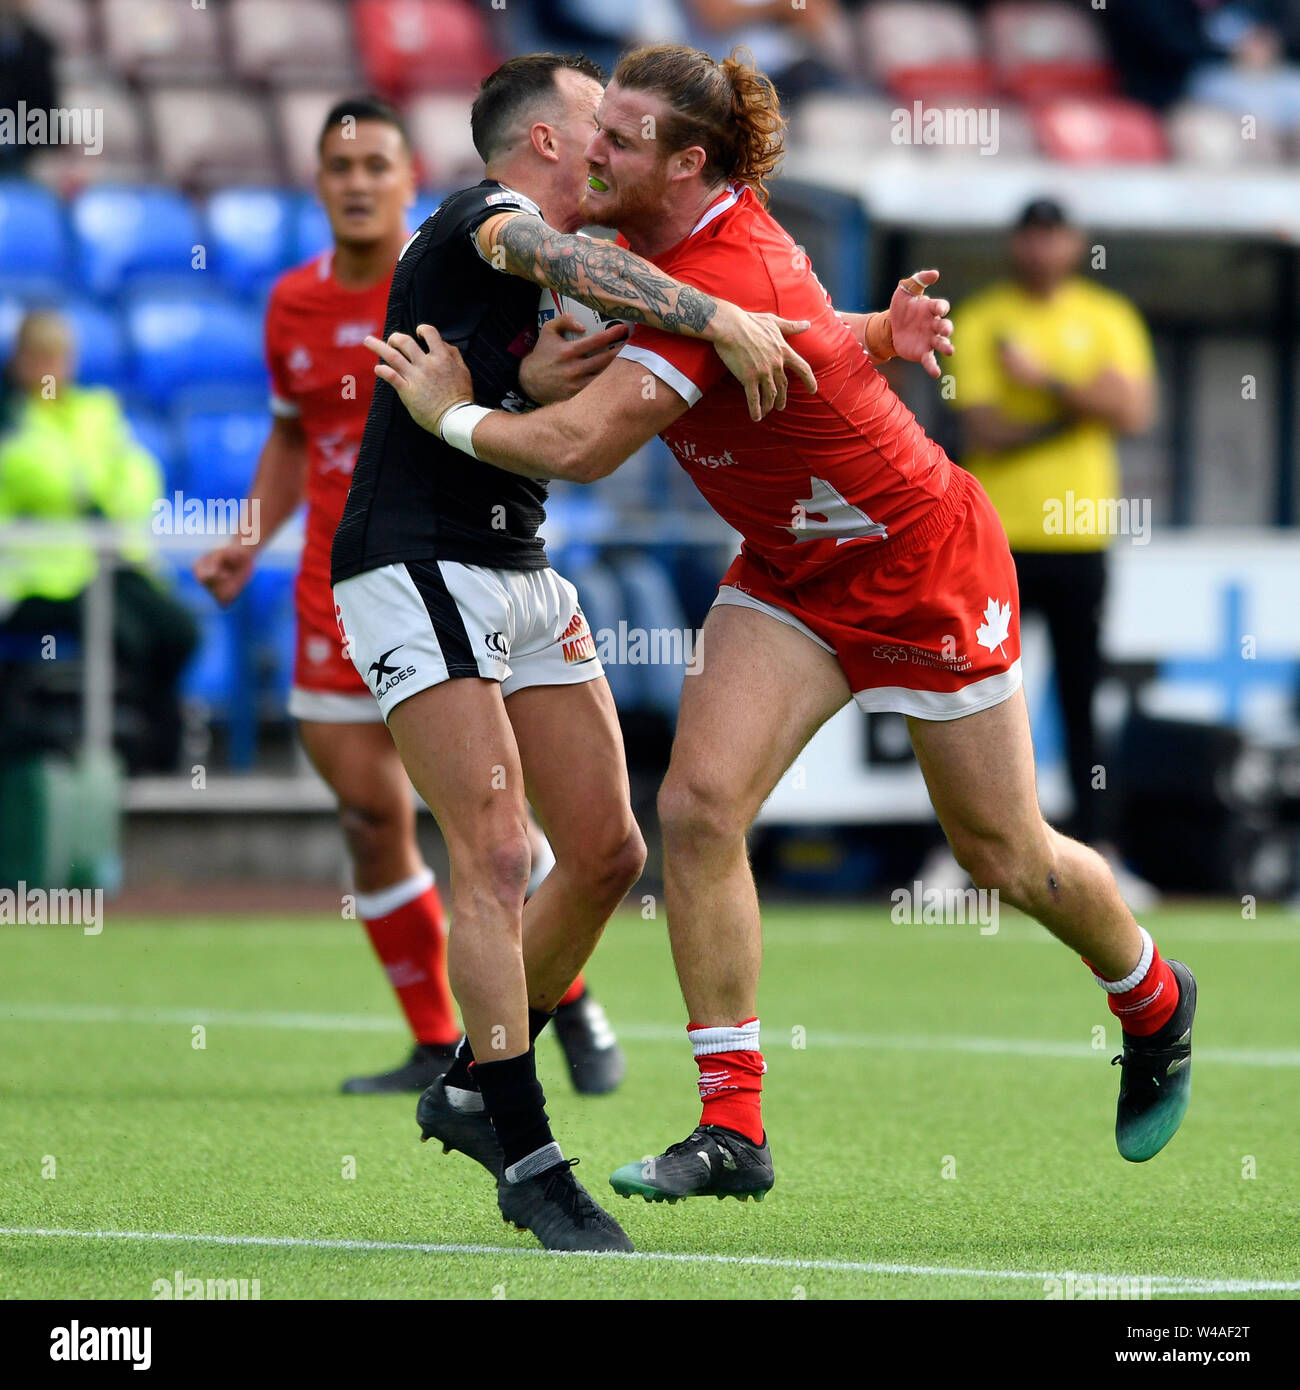 Halton Stadium, Widnes, Cheshire, UK. 21st July, 2019. Betfred Rugby League, Widnes Vikings versus Toronto Wolfpack; Anthony Mullally of Toronto Wolfpack runs into the tackle from Danny Craven of Widnes Vikings Credit: Action Plus Sports/Alamy Live News Stock Photo